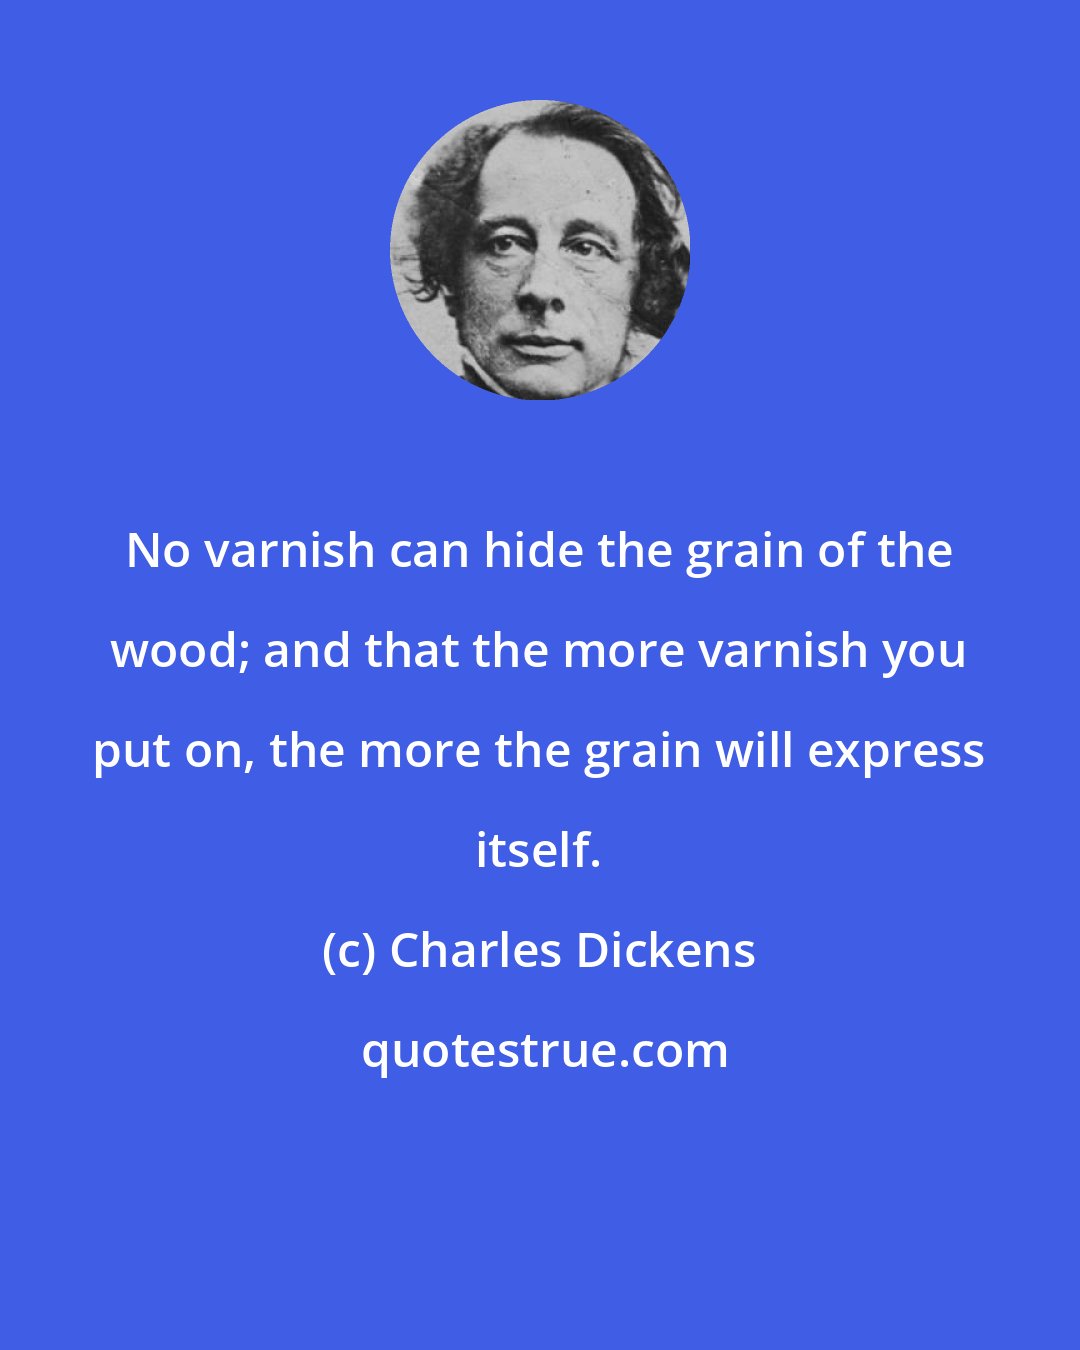 Charles Dickens: No varnish can hide the grain of the wood; and that the more varnish you put on, the more the grain will express itself.